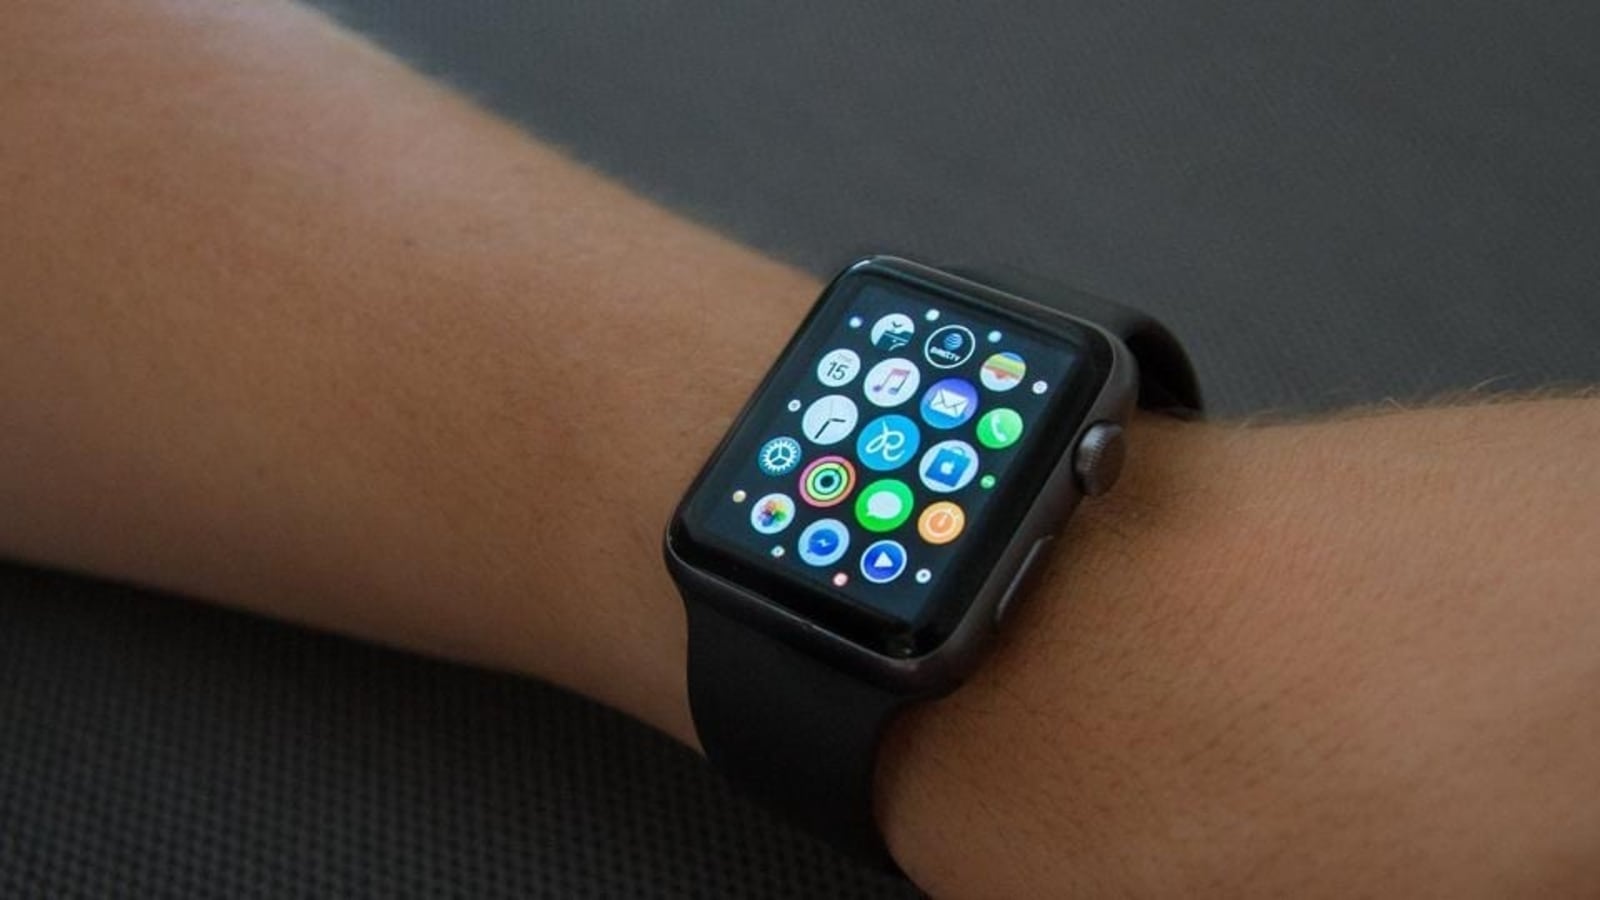 Apple Watch’s ECG can help diagnose heart problem: Research